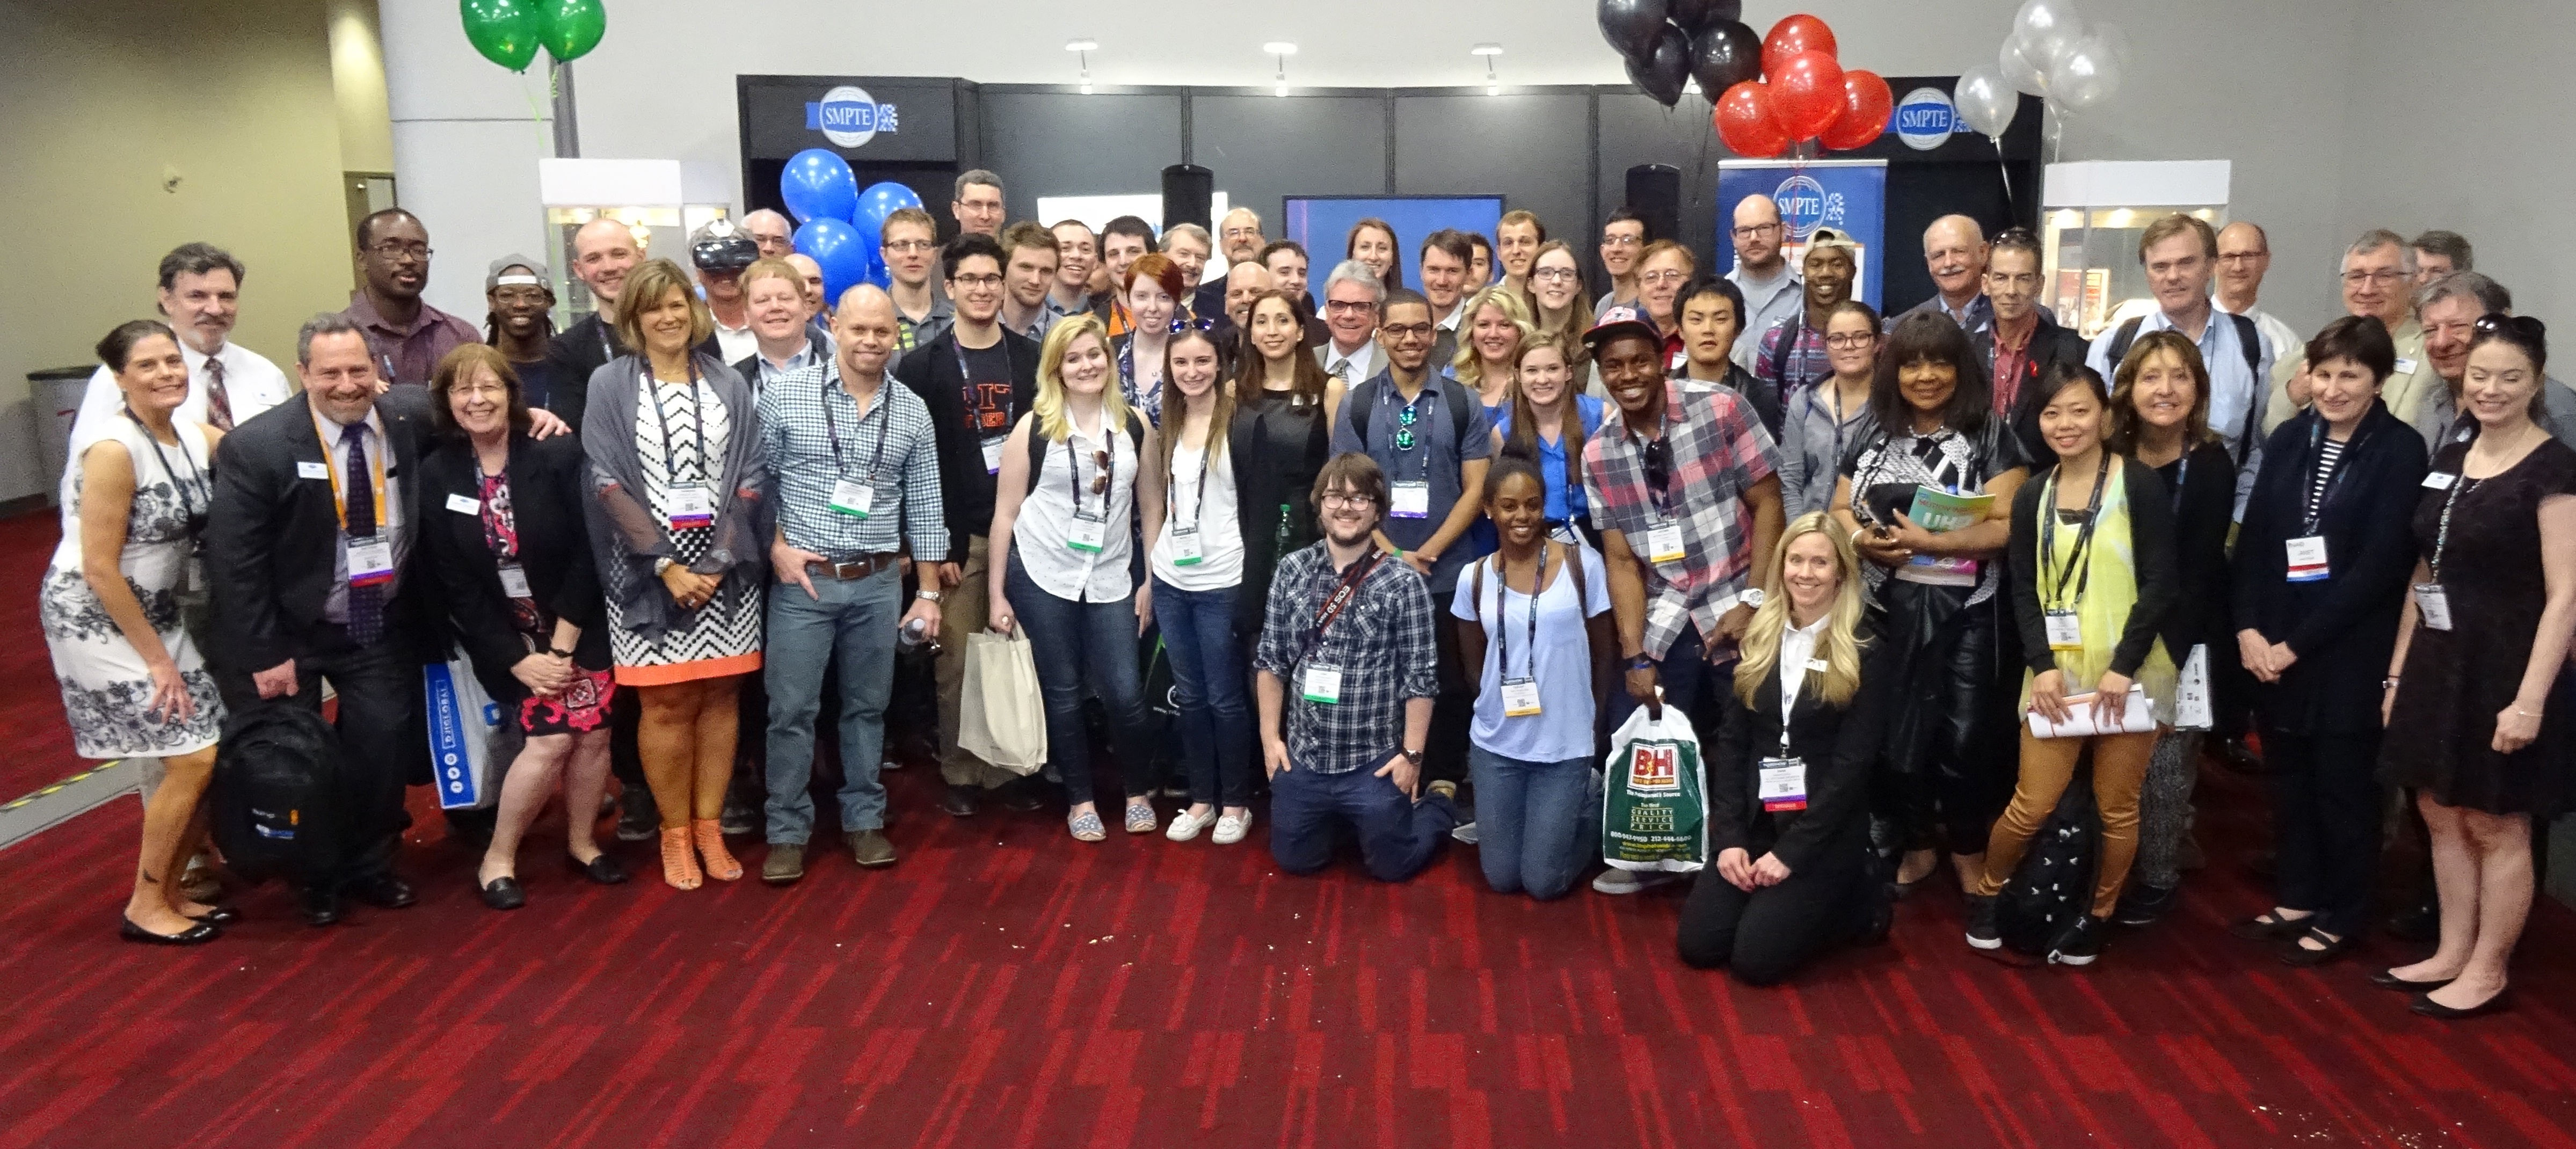 SMPTE Leadership Pose With Students (Photo Credit: Keith Graham, SMPTE San Francisco Section Chair)